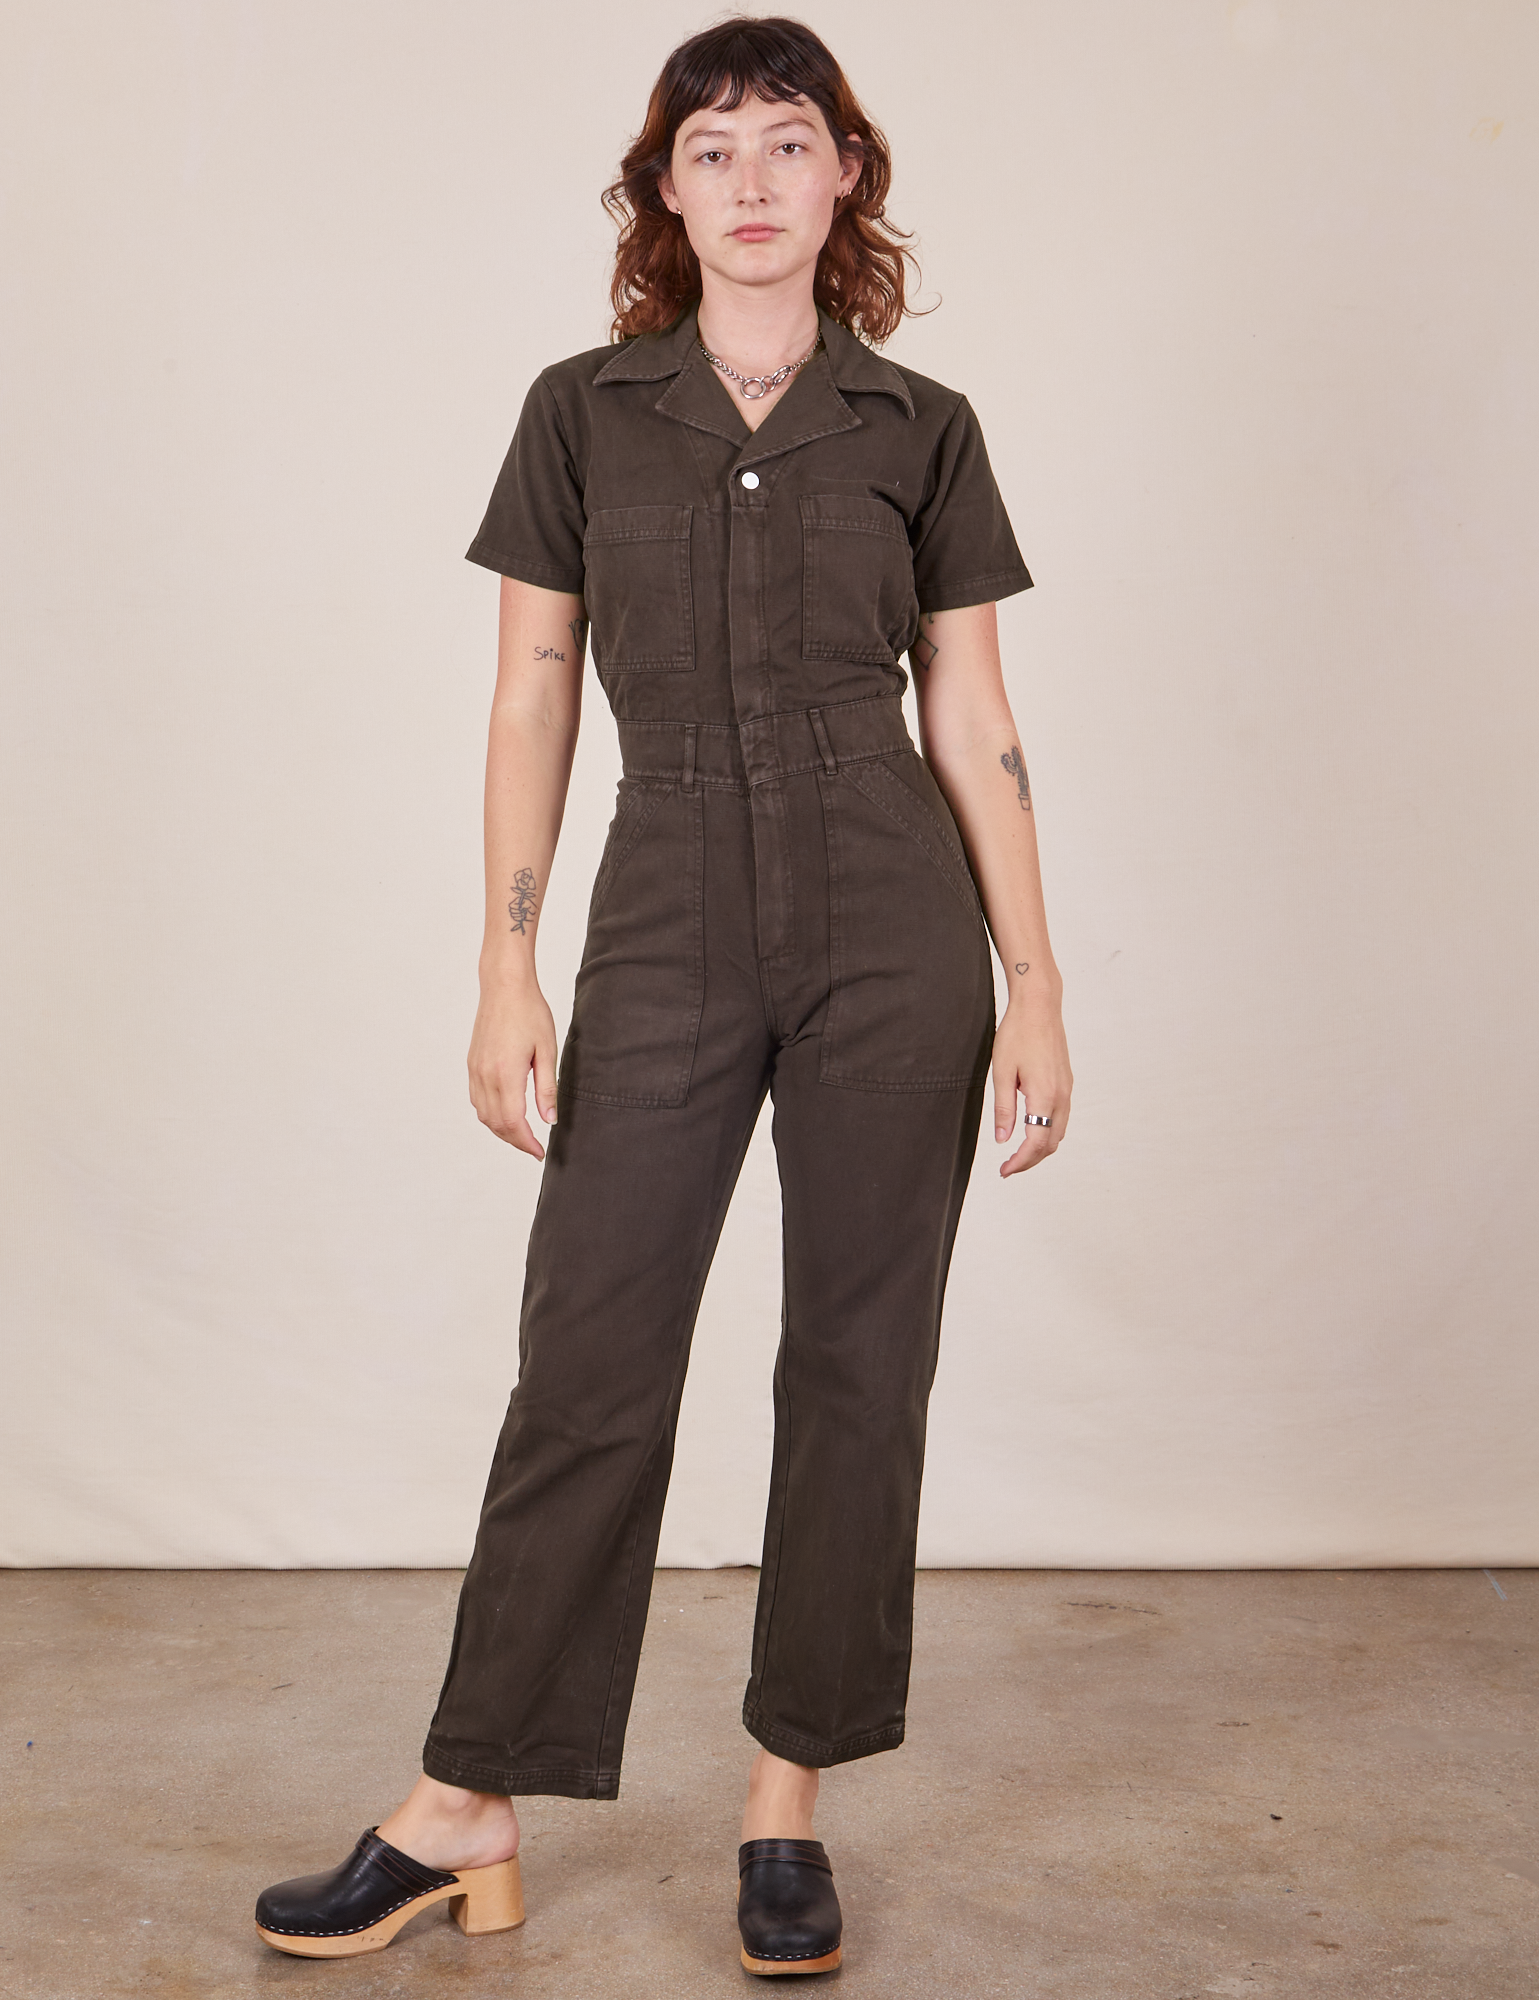 Alex is 5&#39;8&quot; and wearing XS Short Sleeve Jumpsuit in Espresso Brown